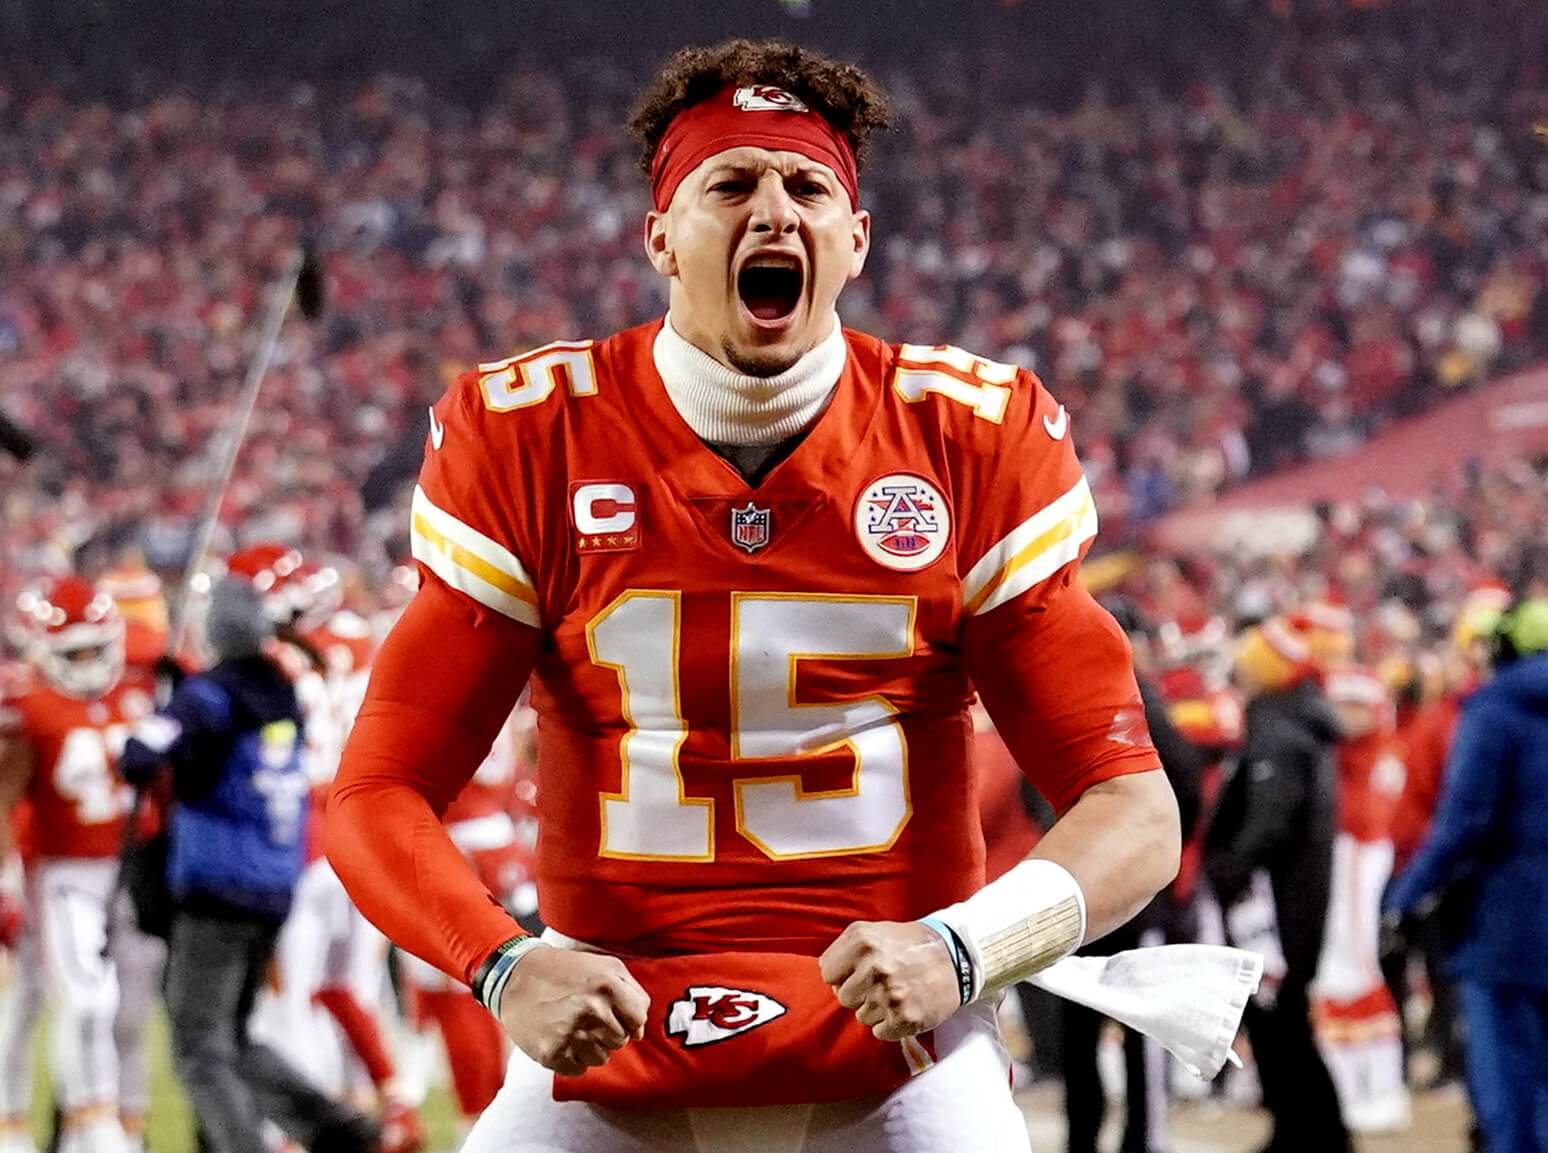 Bengals vs. Chiefs: 2022 AFC Championship Game preview, odds, promos, more